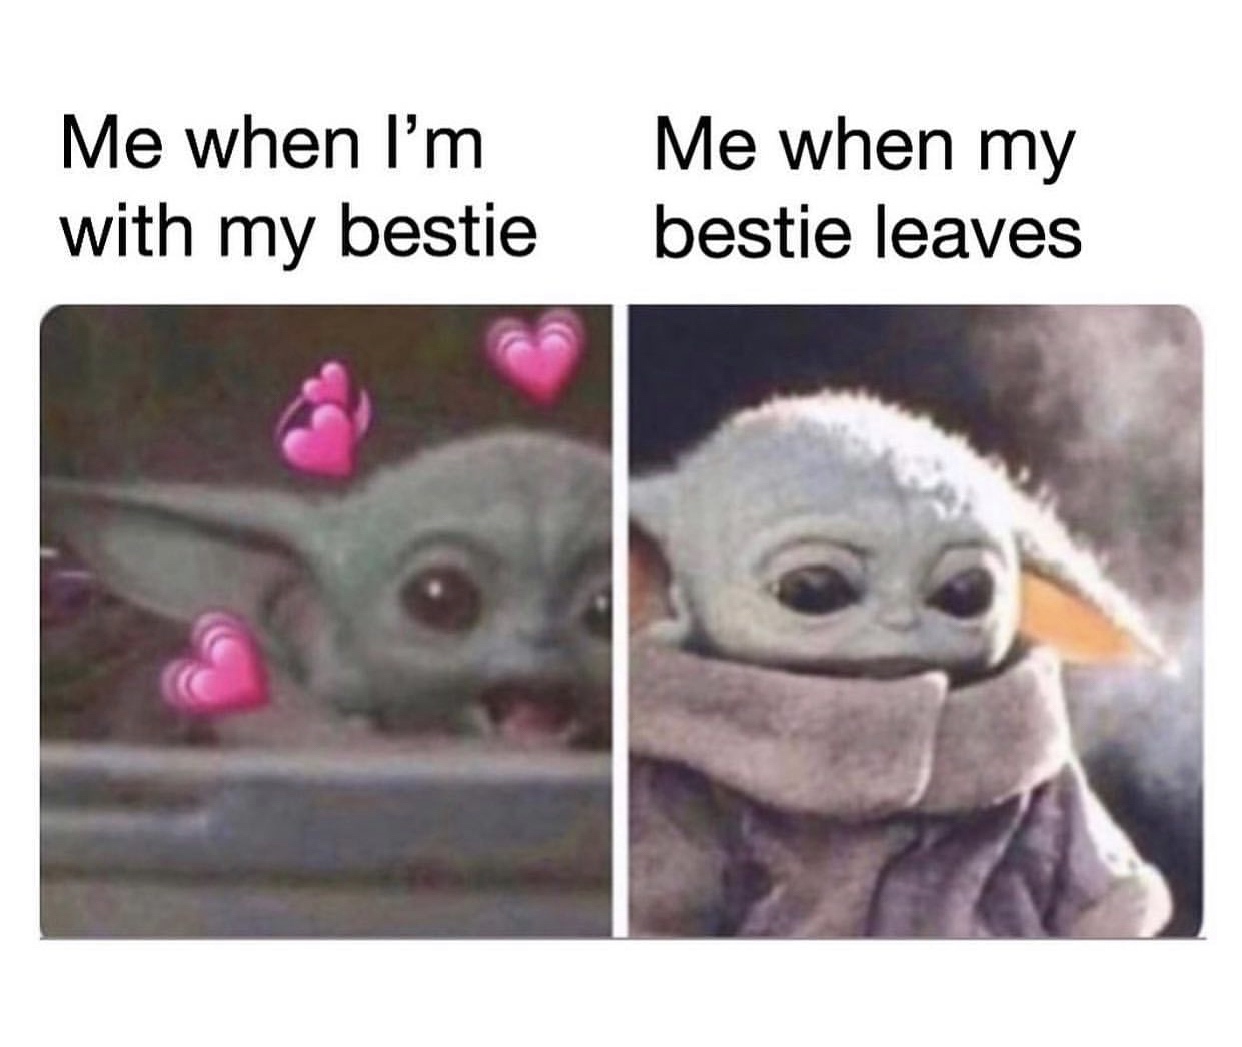 photo caption - Me when I'm Me when my with my bestiebestie leaves